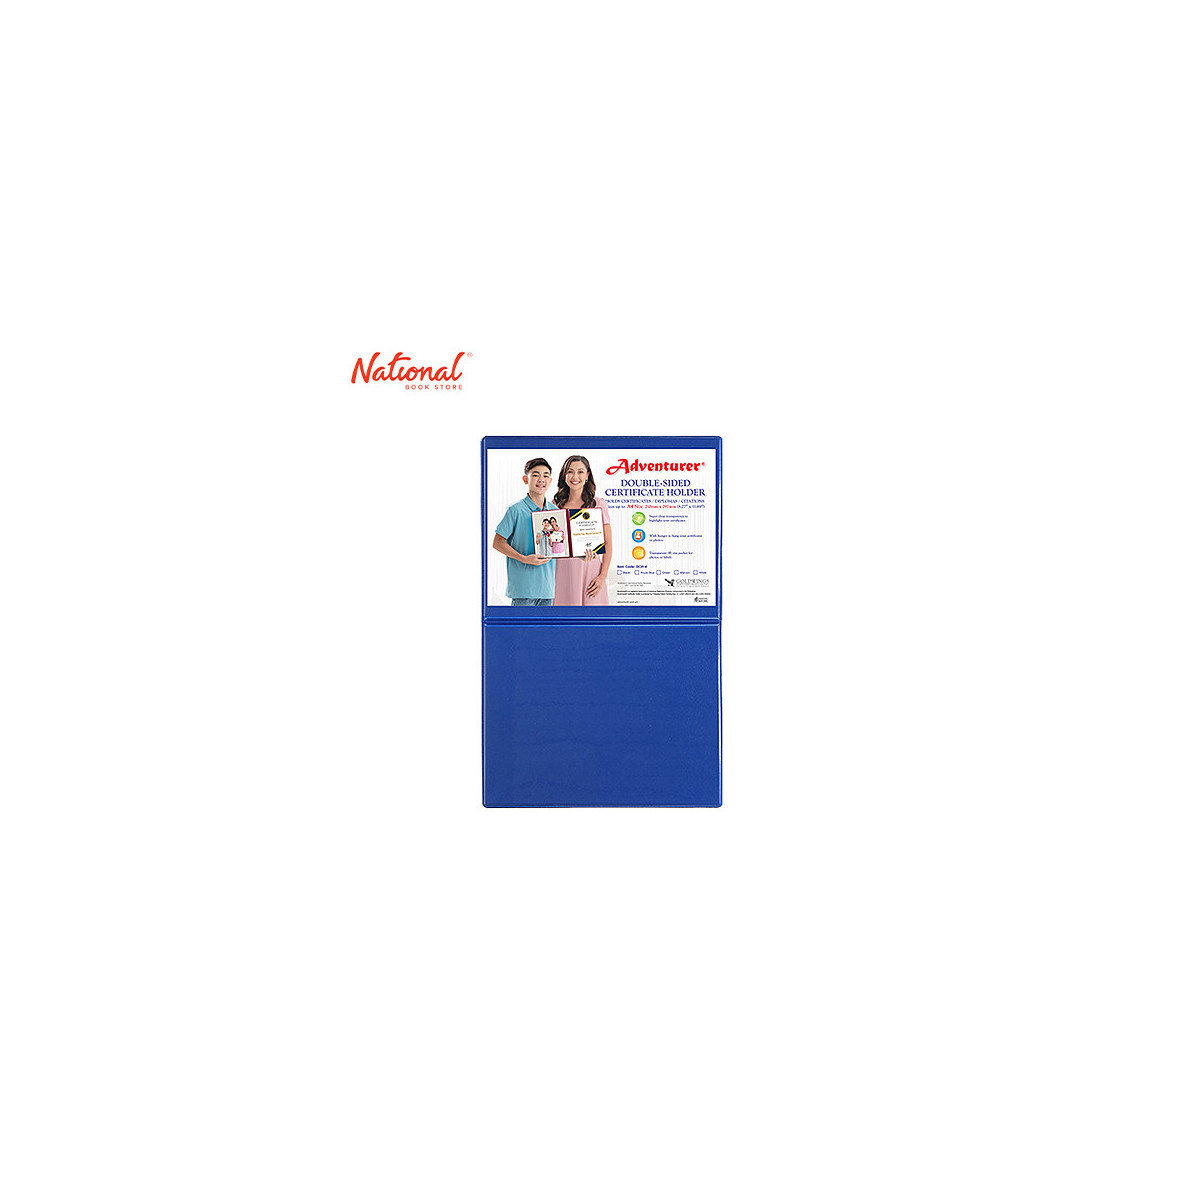 Adventurer Double Sided Certificate Holder 8.27x11.69 inches DCH-4, Royal Blue